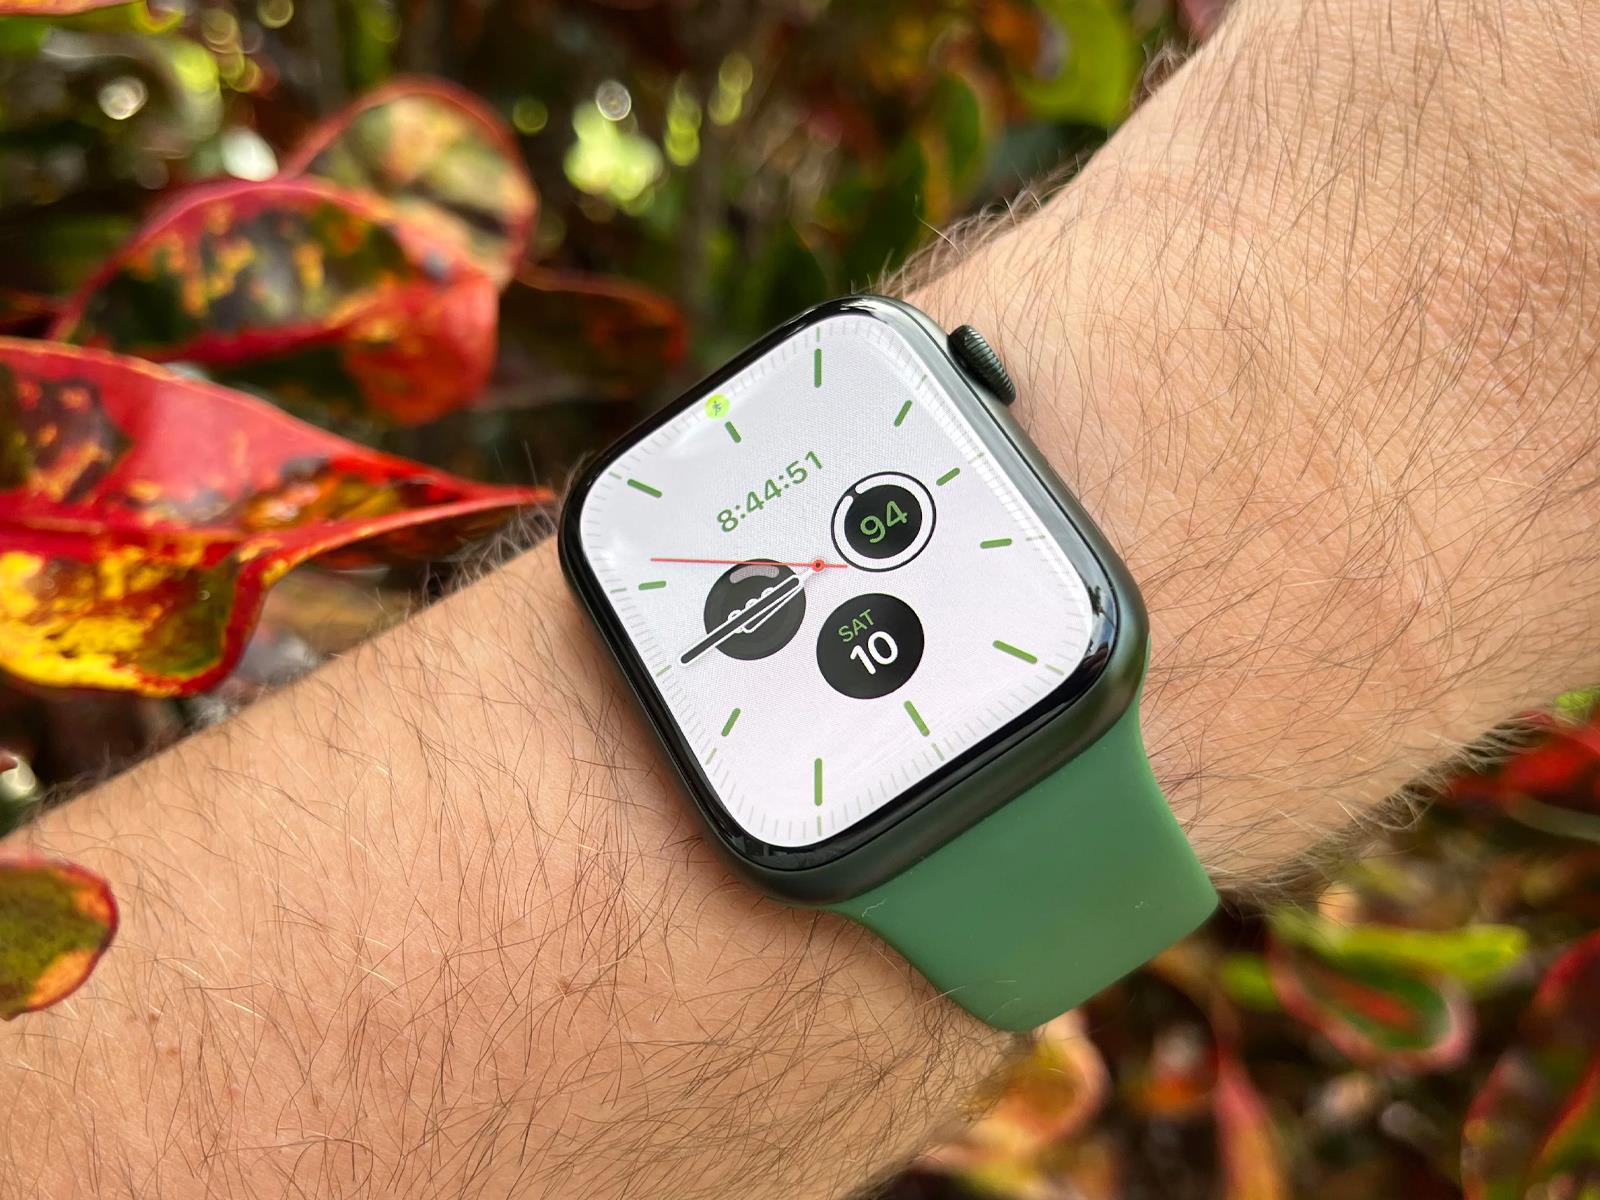 Image shows a close up view of the Apple Watch Series 7 on a wrist